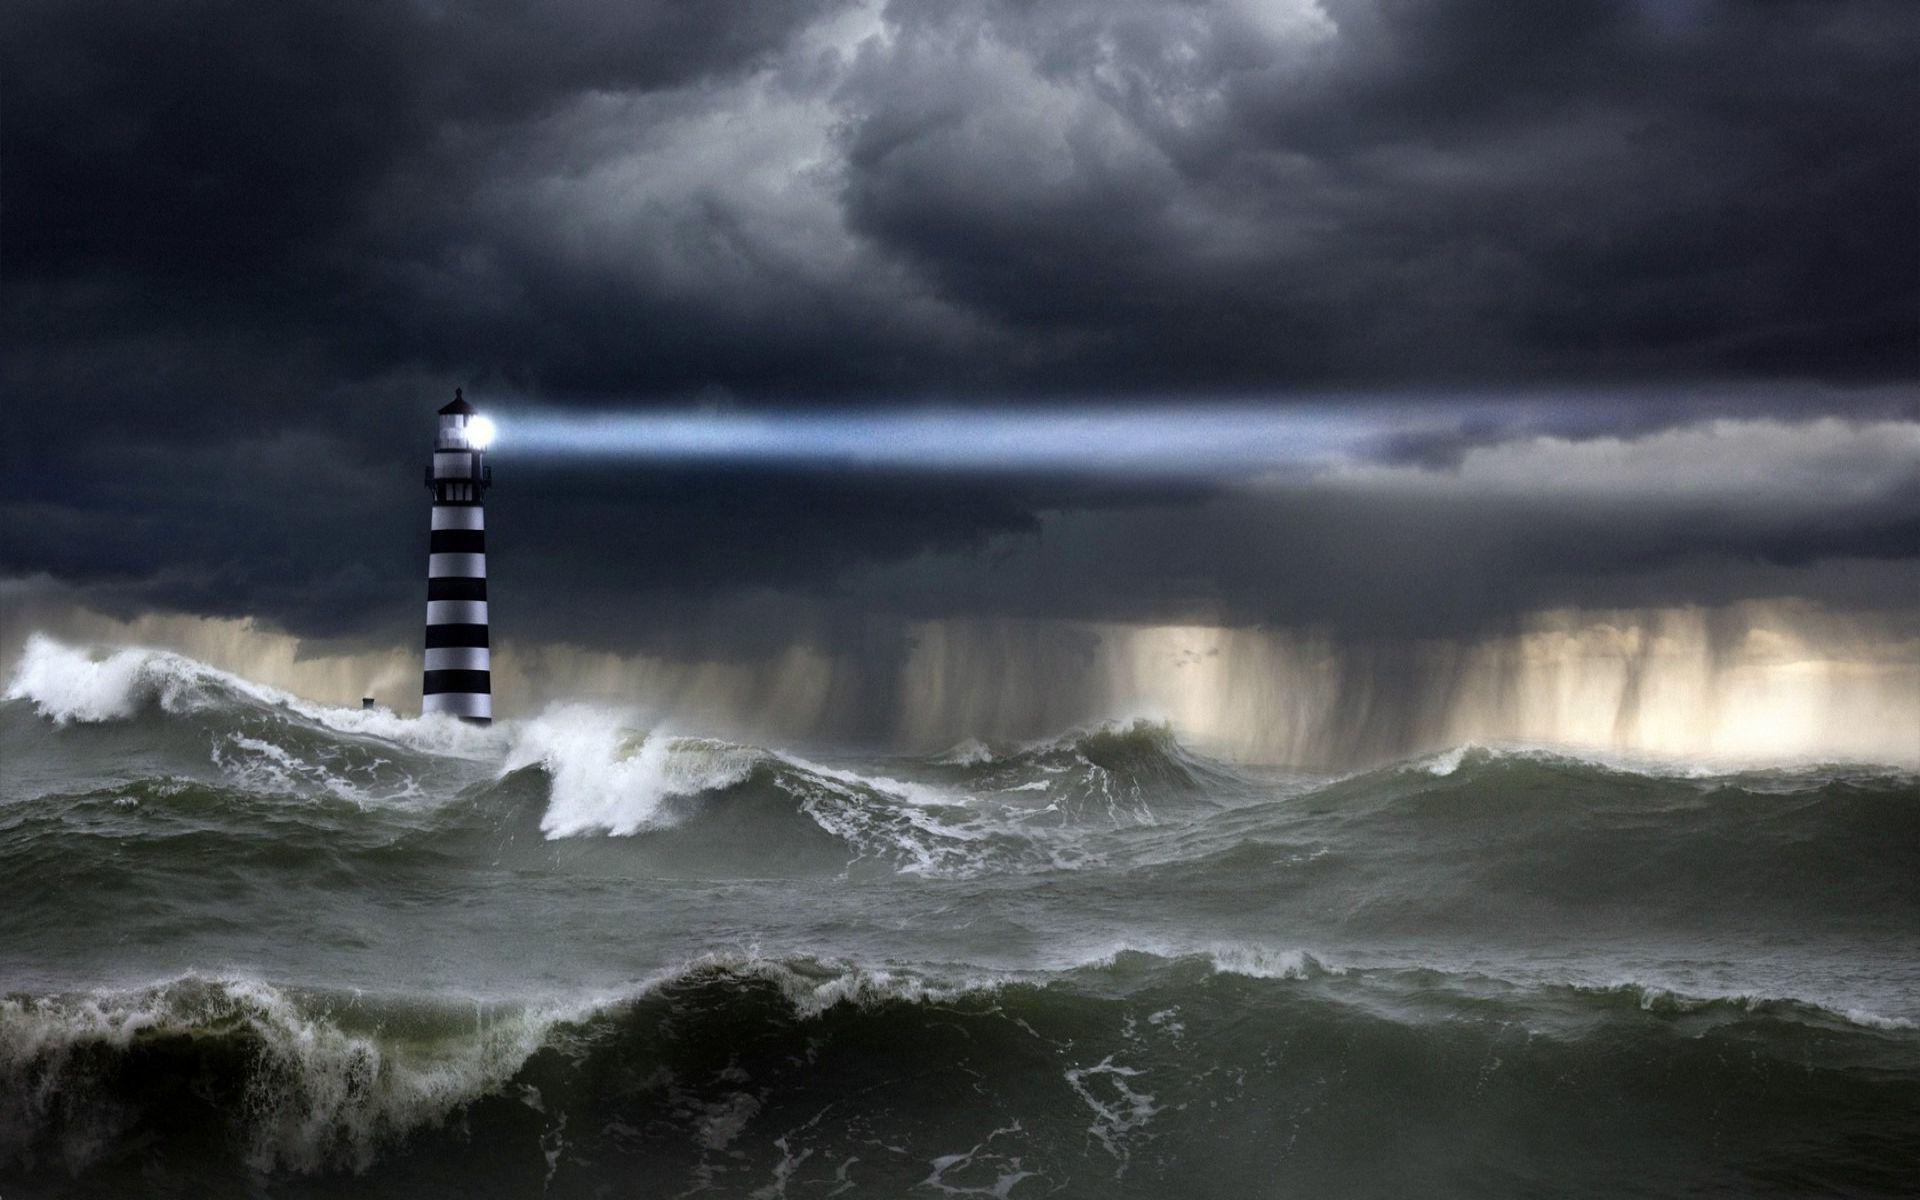 Lighthouse Storm HD Wallpaper, Background Image